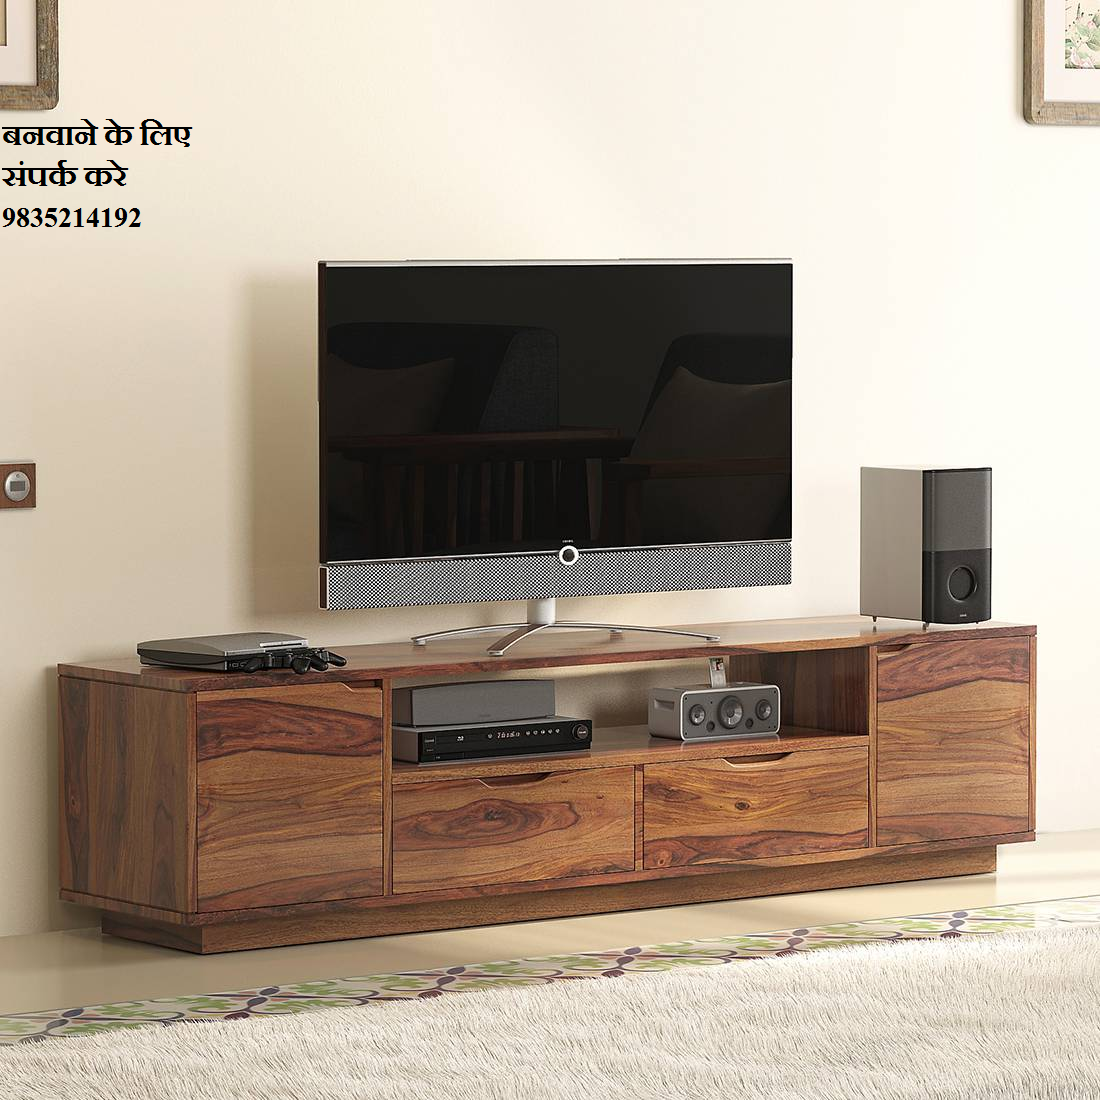 Top 10 Tv Unit Designs That Fit For Your Homes || Tv Unit Maker In Patna || Tv Units